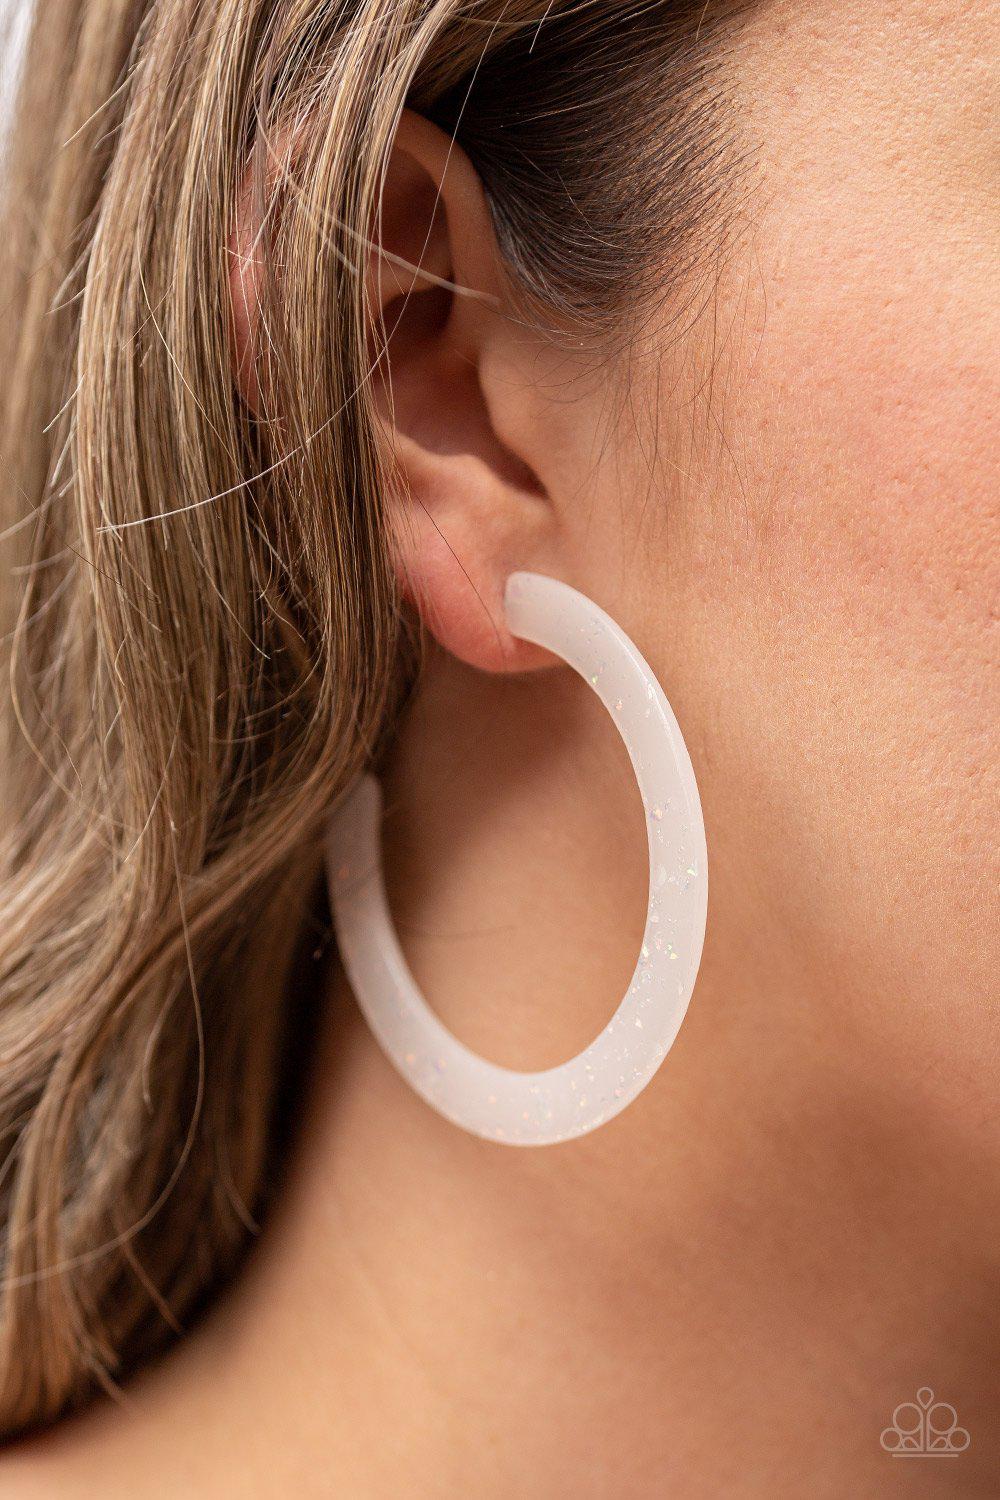 Haute Tamale White Acrylic Hoop Earrings - Paparazzi Accessories-CarasShop.com - $5 Jewelry by Cara Jewels